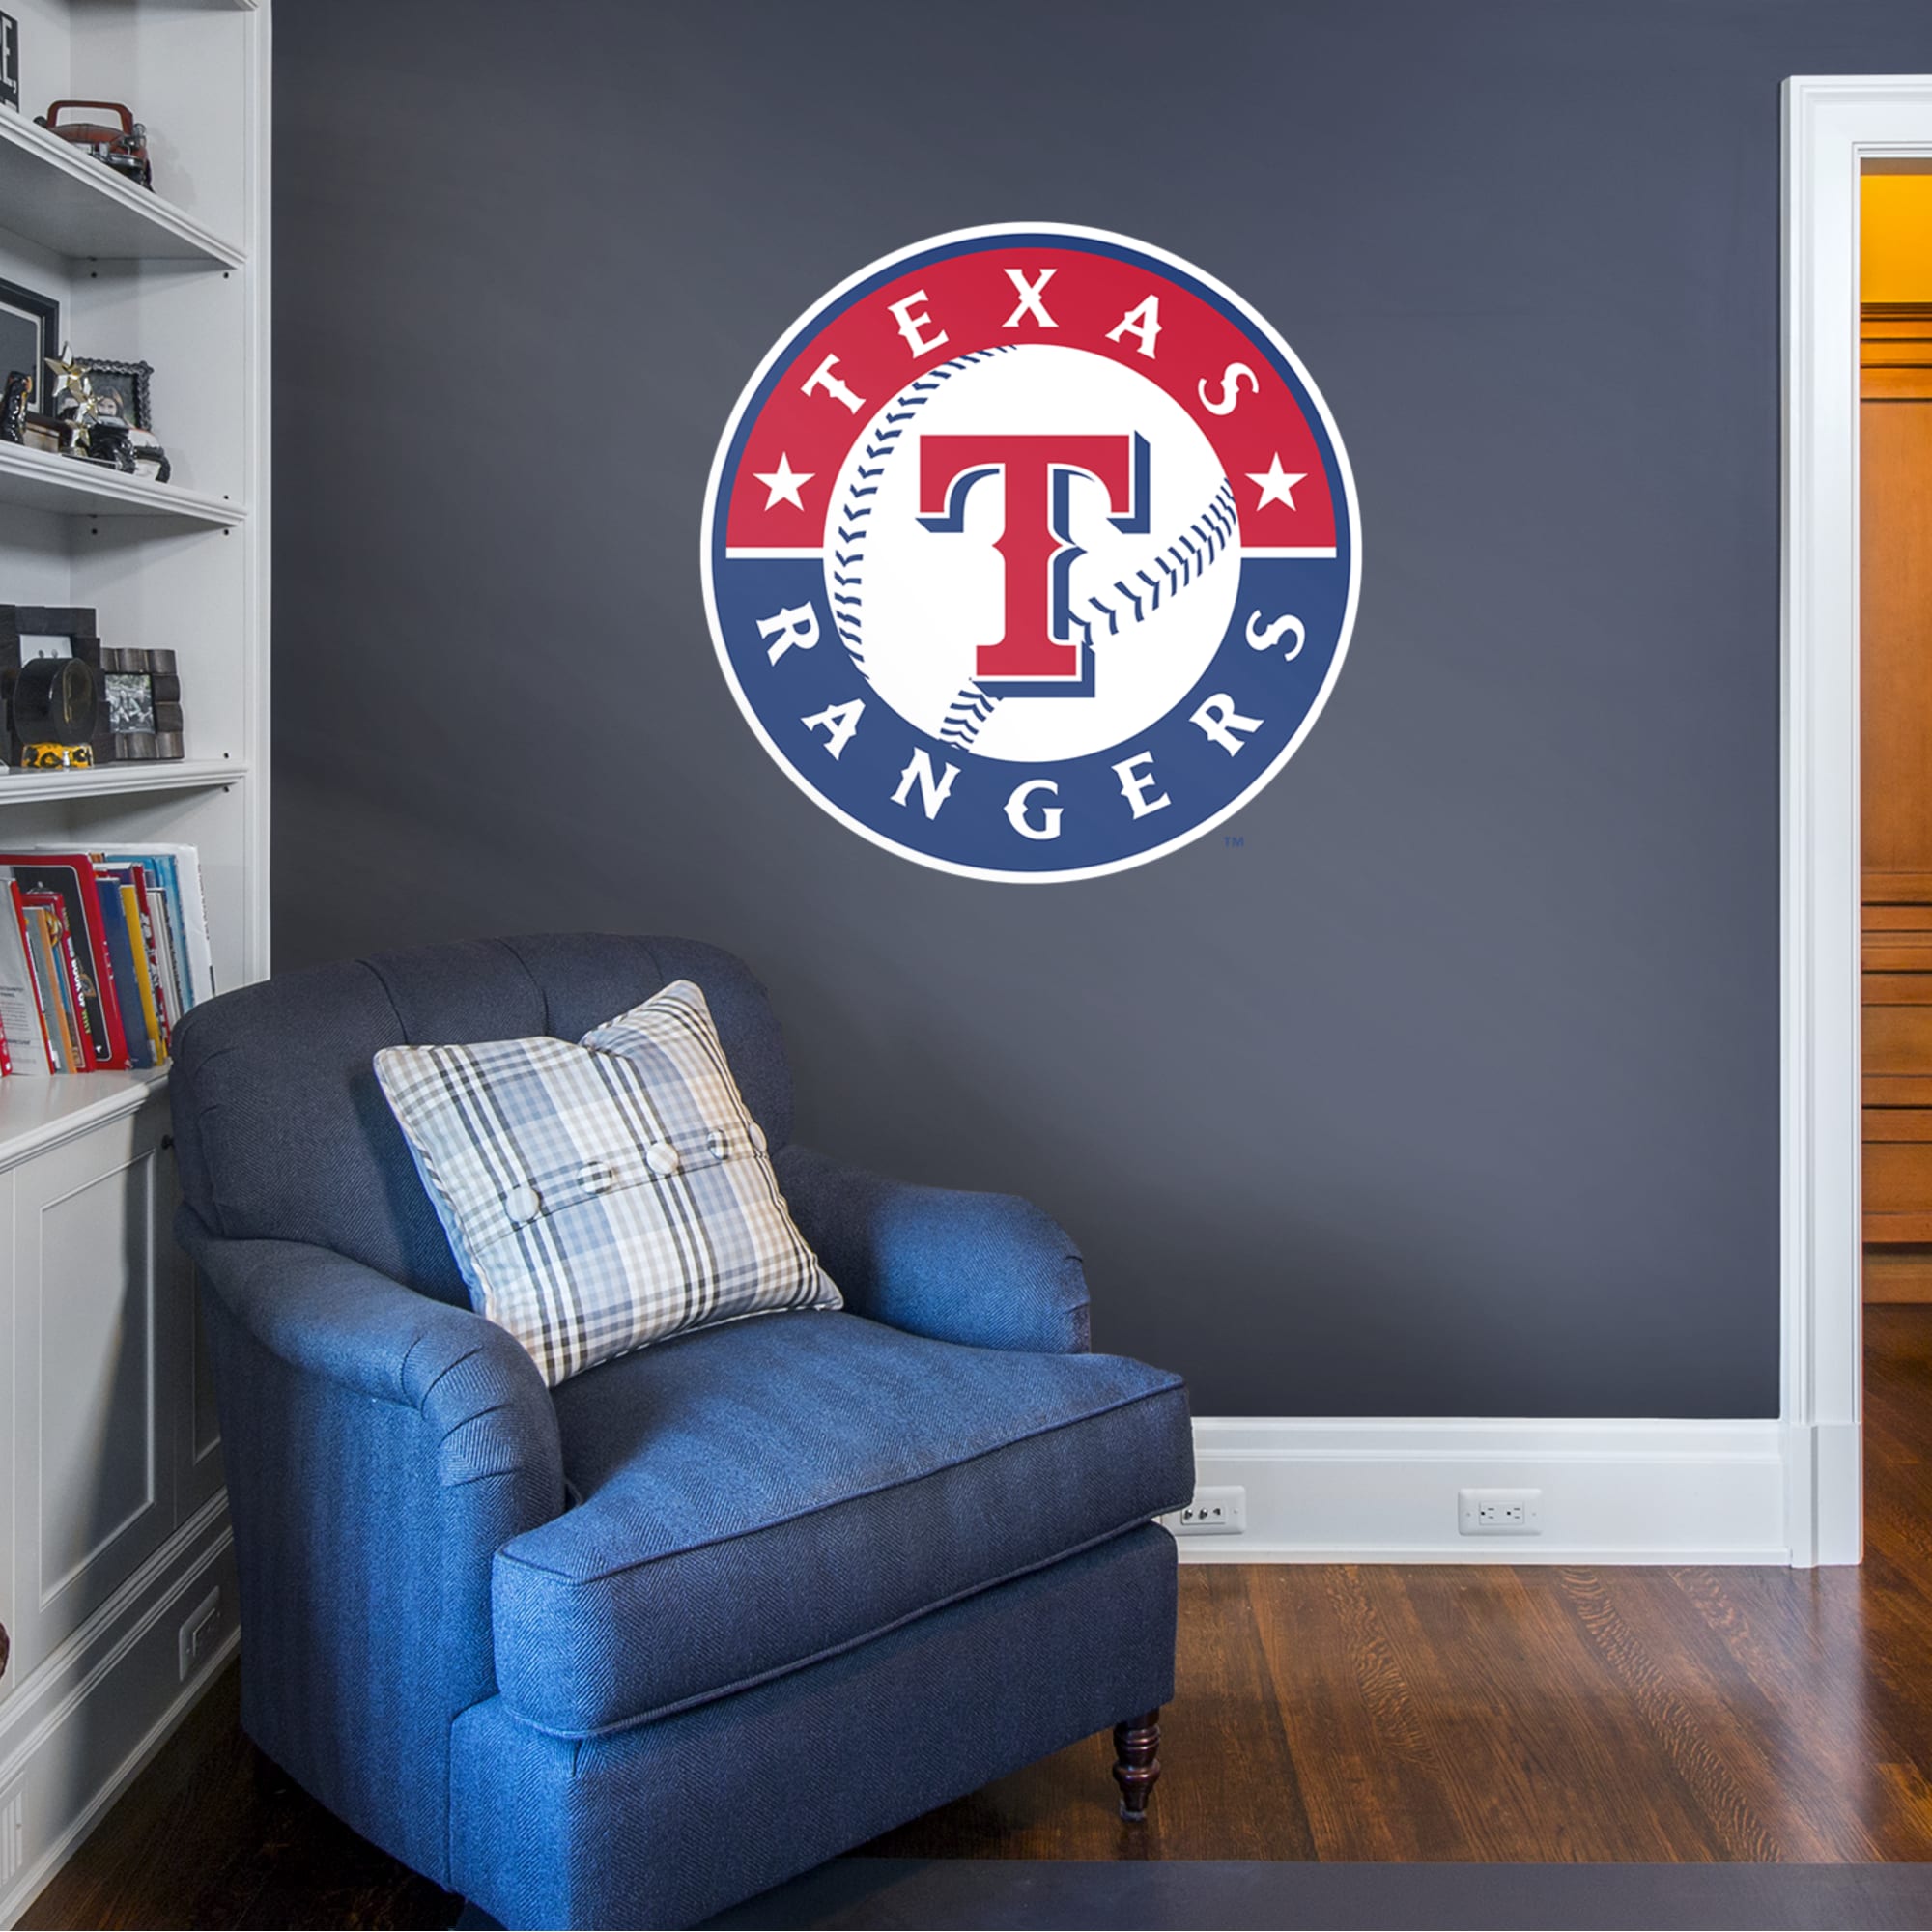 Texas Rangers: Logo - Officially Licensed MLB Removable Wall Decal Giant Logo (39"W x 39"H) by Fathead | Vinyl